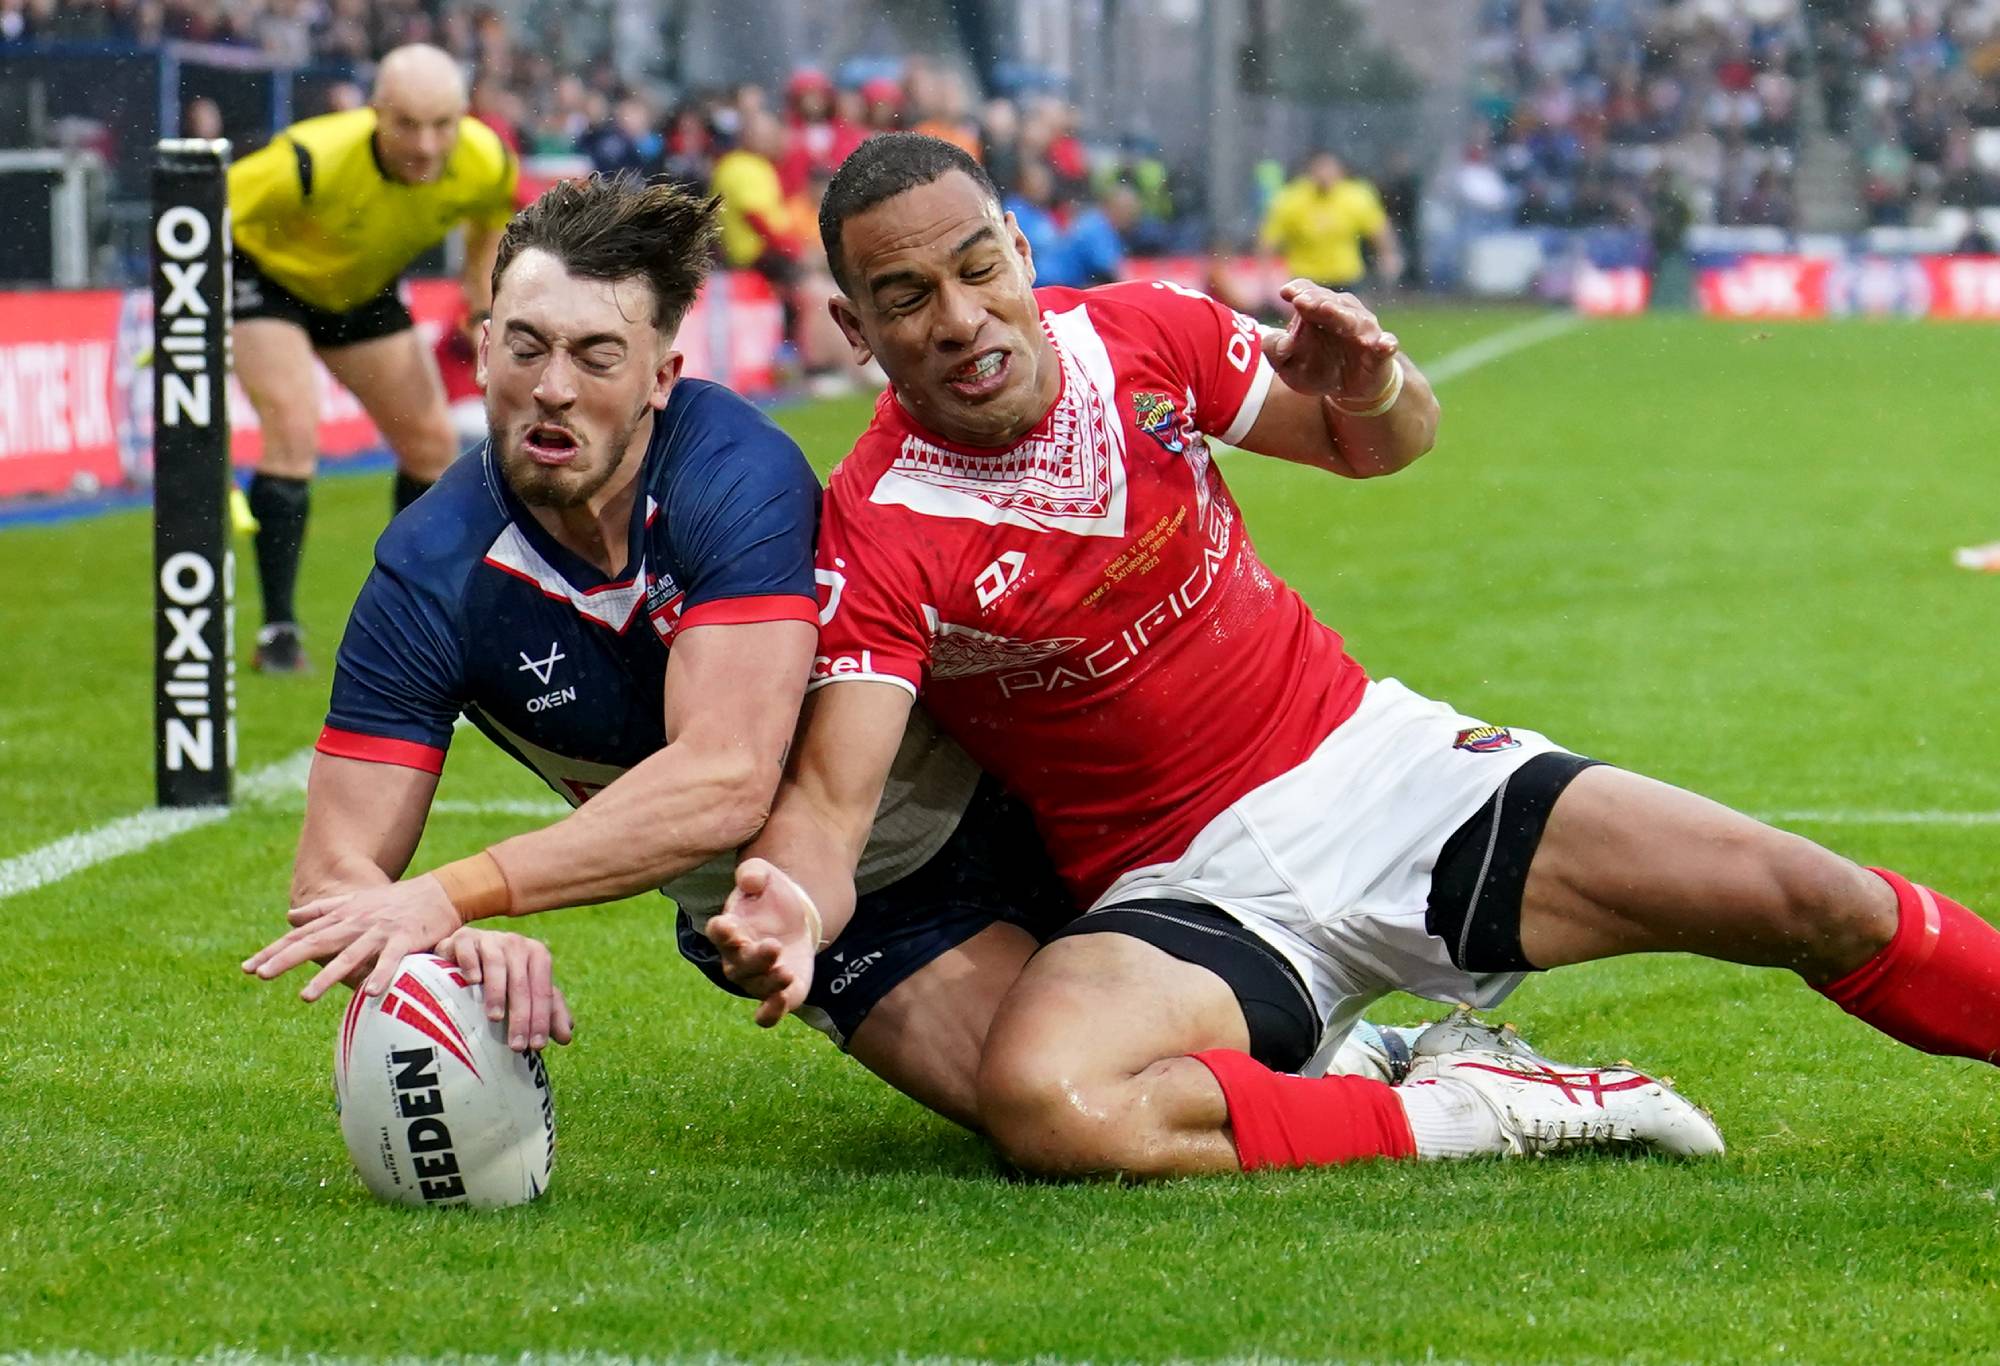 England's Matty Ashton (left) scores his sides second try of the game as Tonga's Will Hopoate (right) is unable to stop him from scoring during the International Test Series match at John Smith's Stadium, Huddersfield. Picture date: Saturday October 28, 2023. (Photo by Martin Rickett/PA Images via Getty Images)